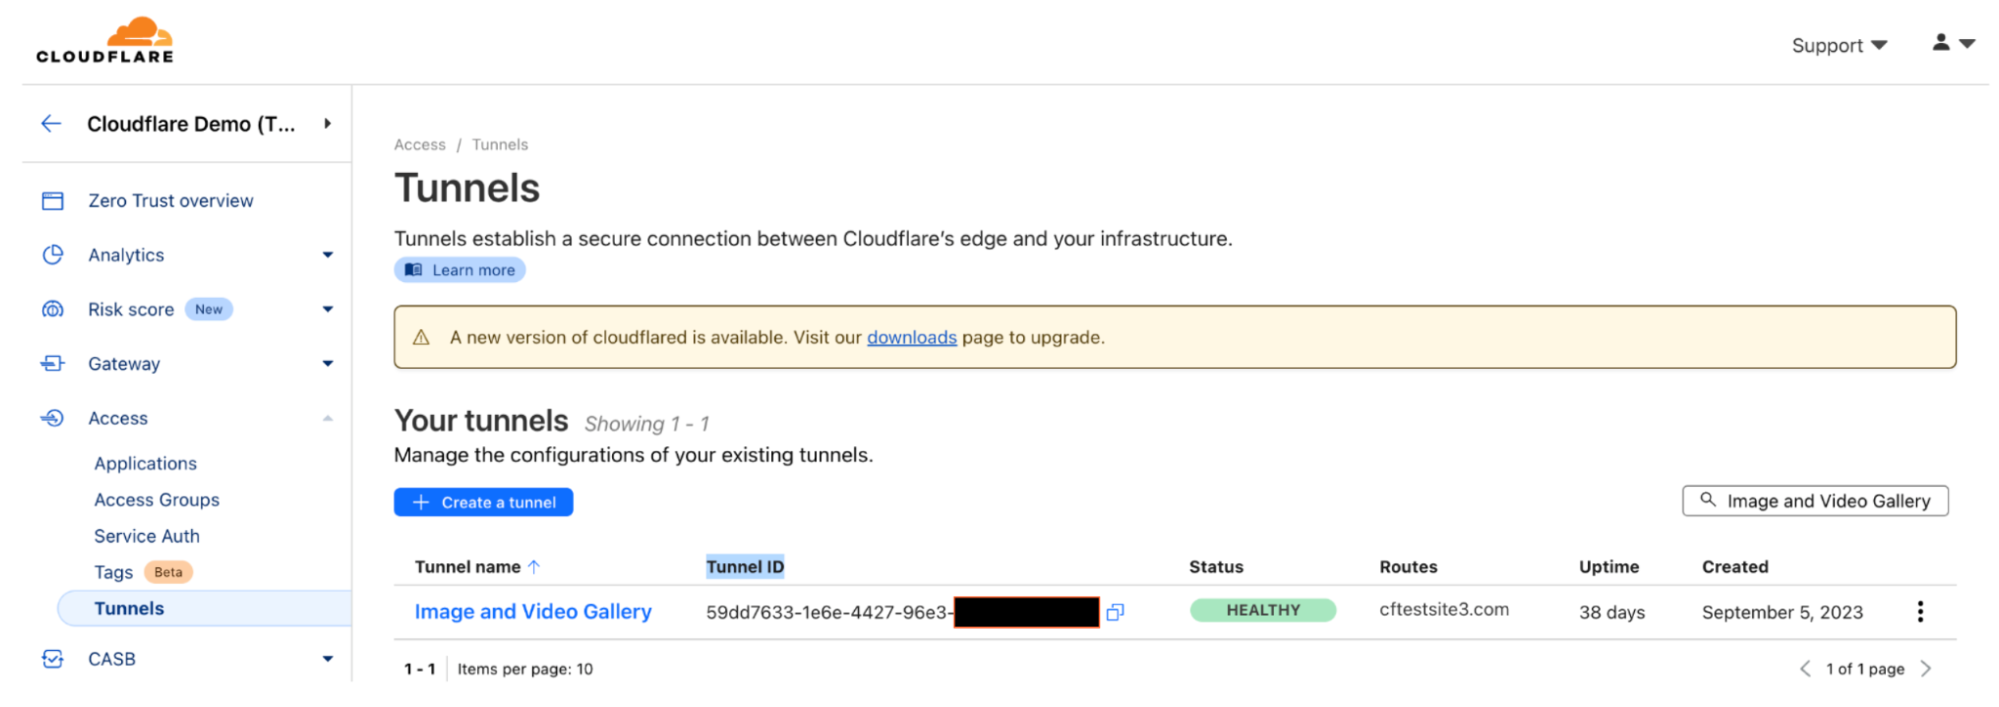 Cloudflare provides health status of deployed tunnels.